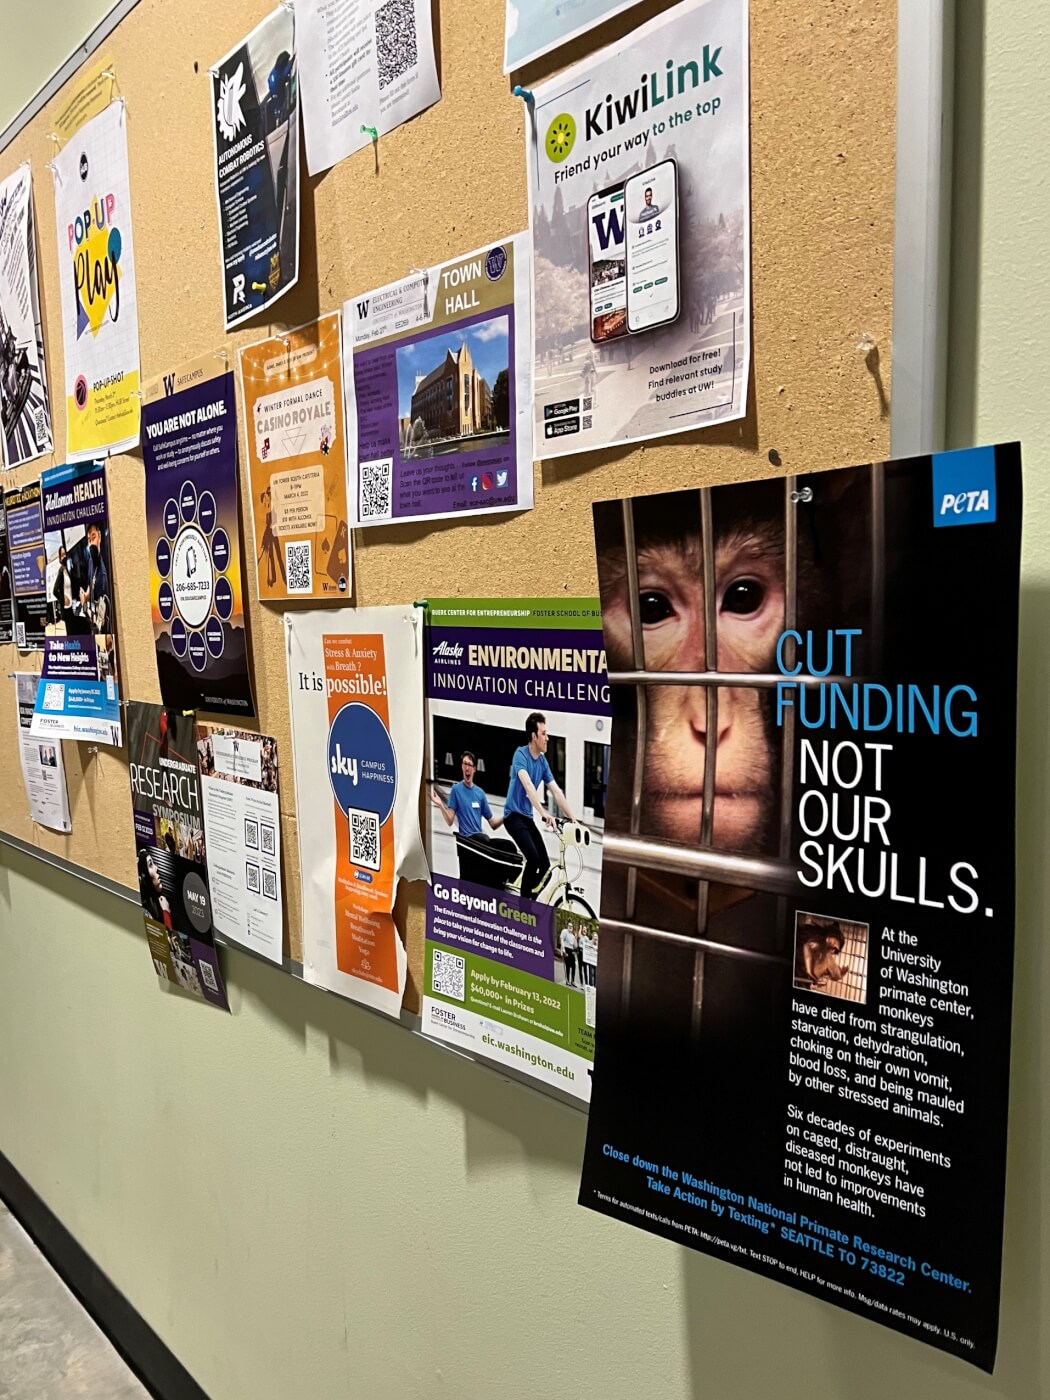 A flyposter hangs on a bulletin board at the University of Washington campus reading "Cut funding, not our skulls"